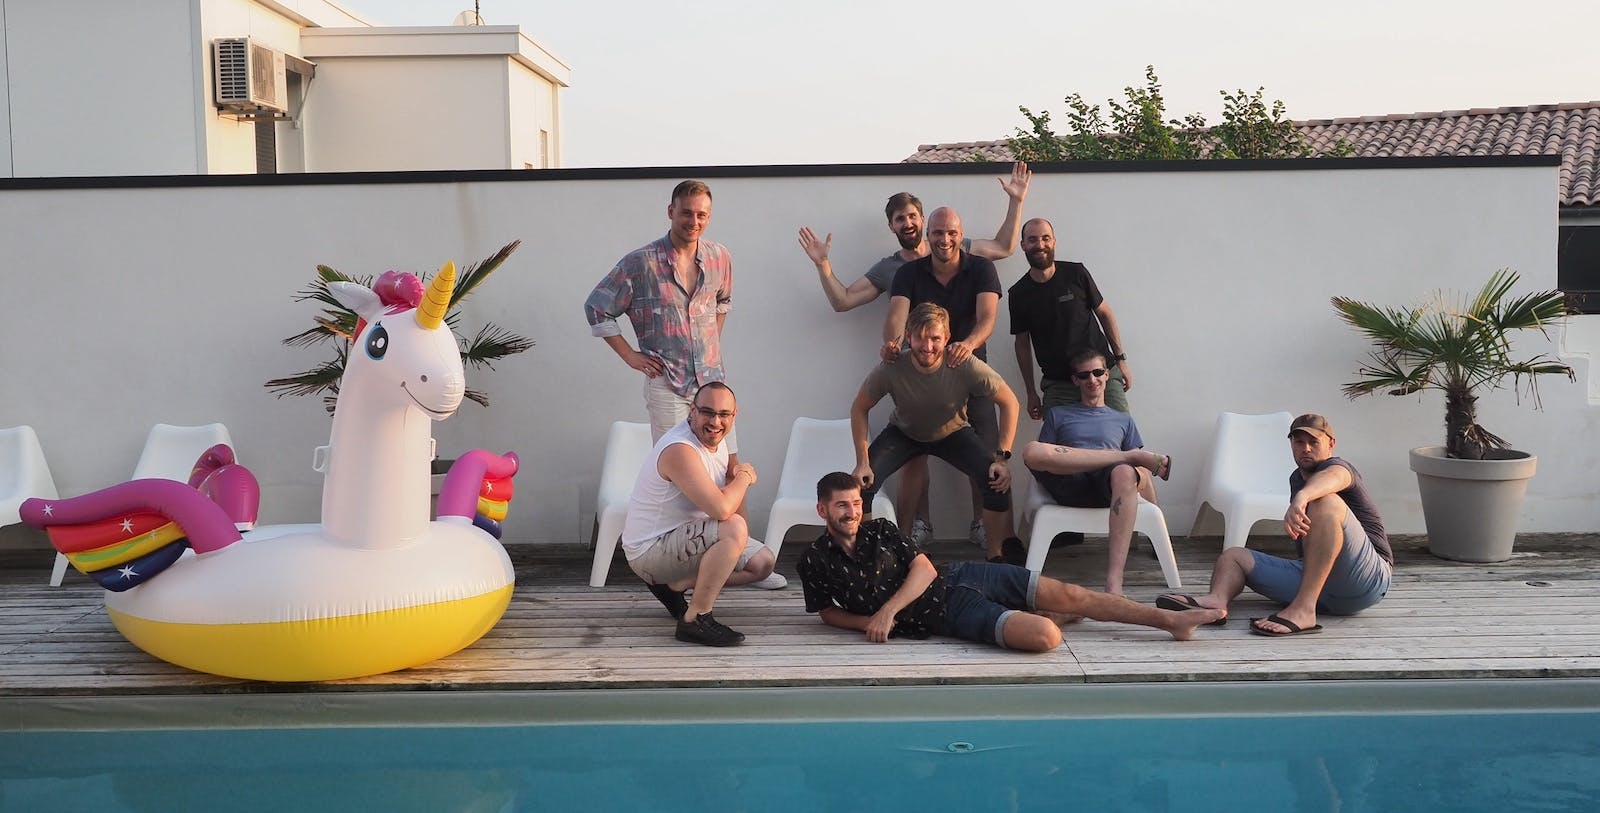 The Qovery team during our summer retreat 2021 in France